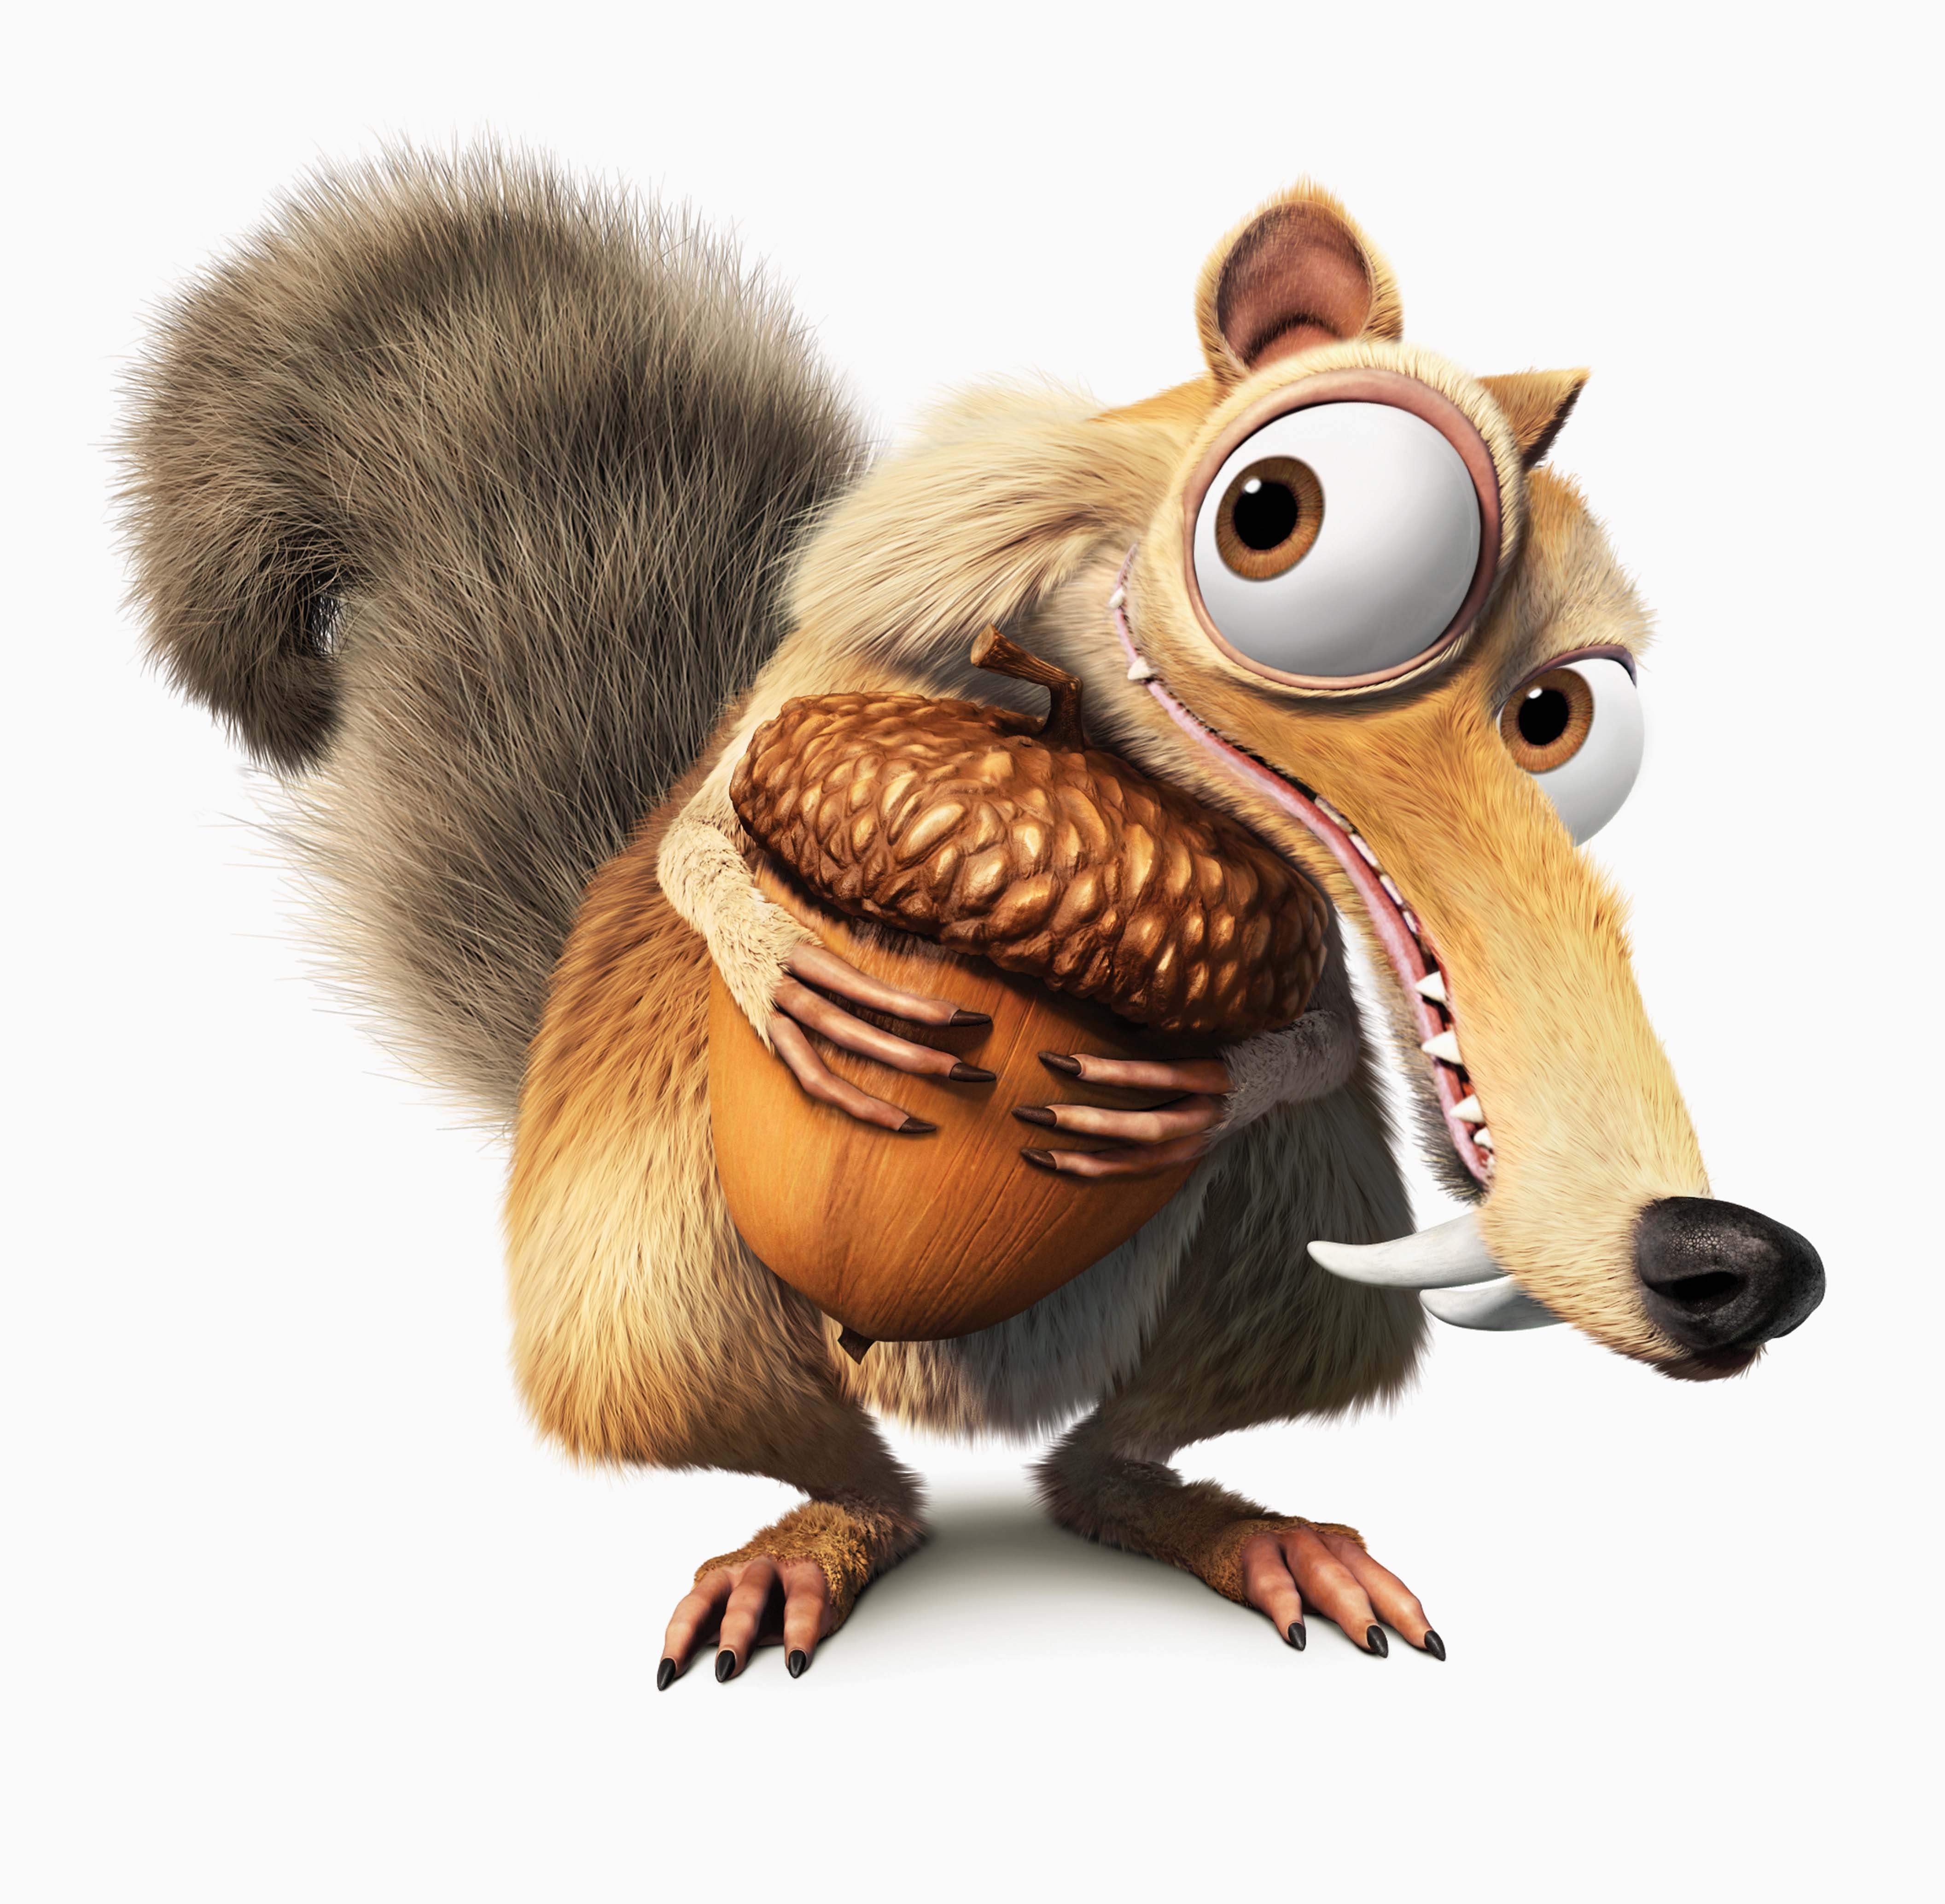 General 4224x4135 Scrat Ice Age movies animated movies